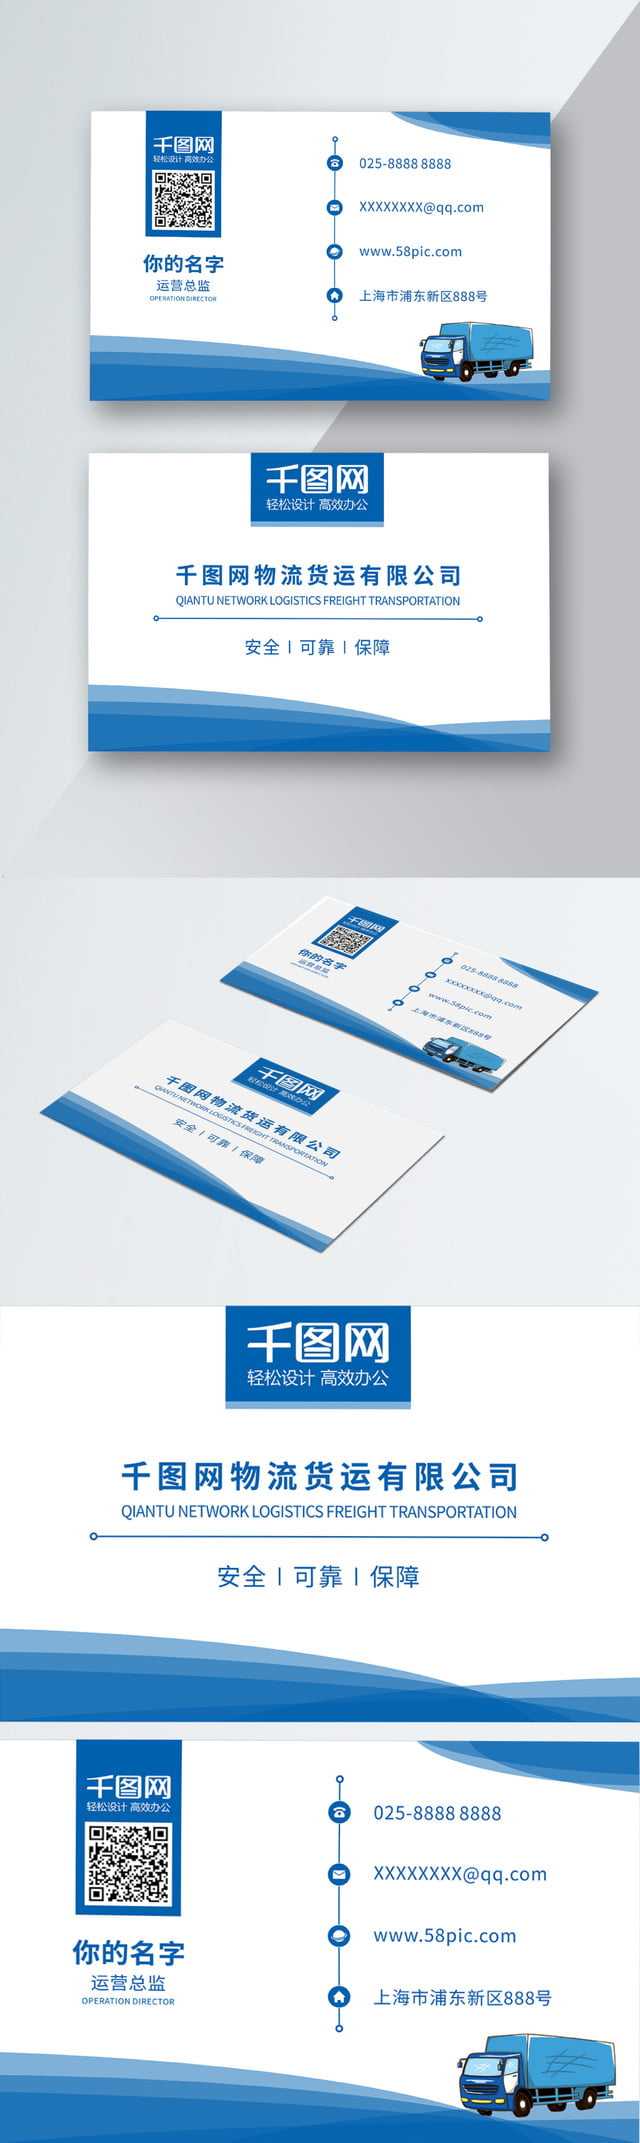 Cargo Company Business Card Material Download Shipping In Transport Business Cards Templates Free